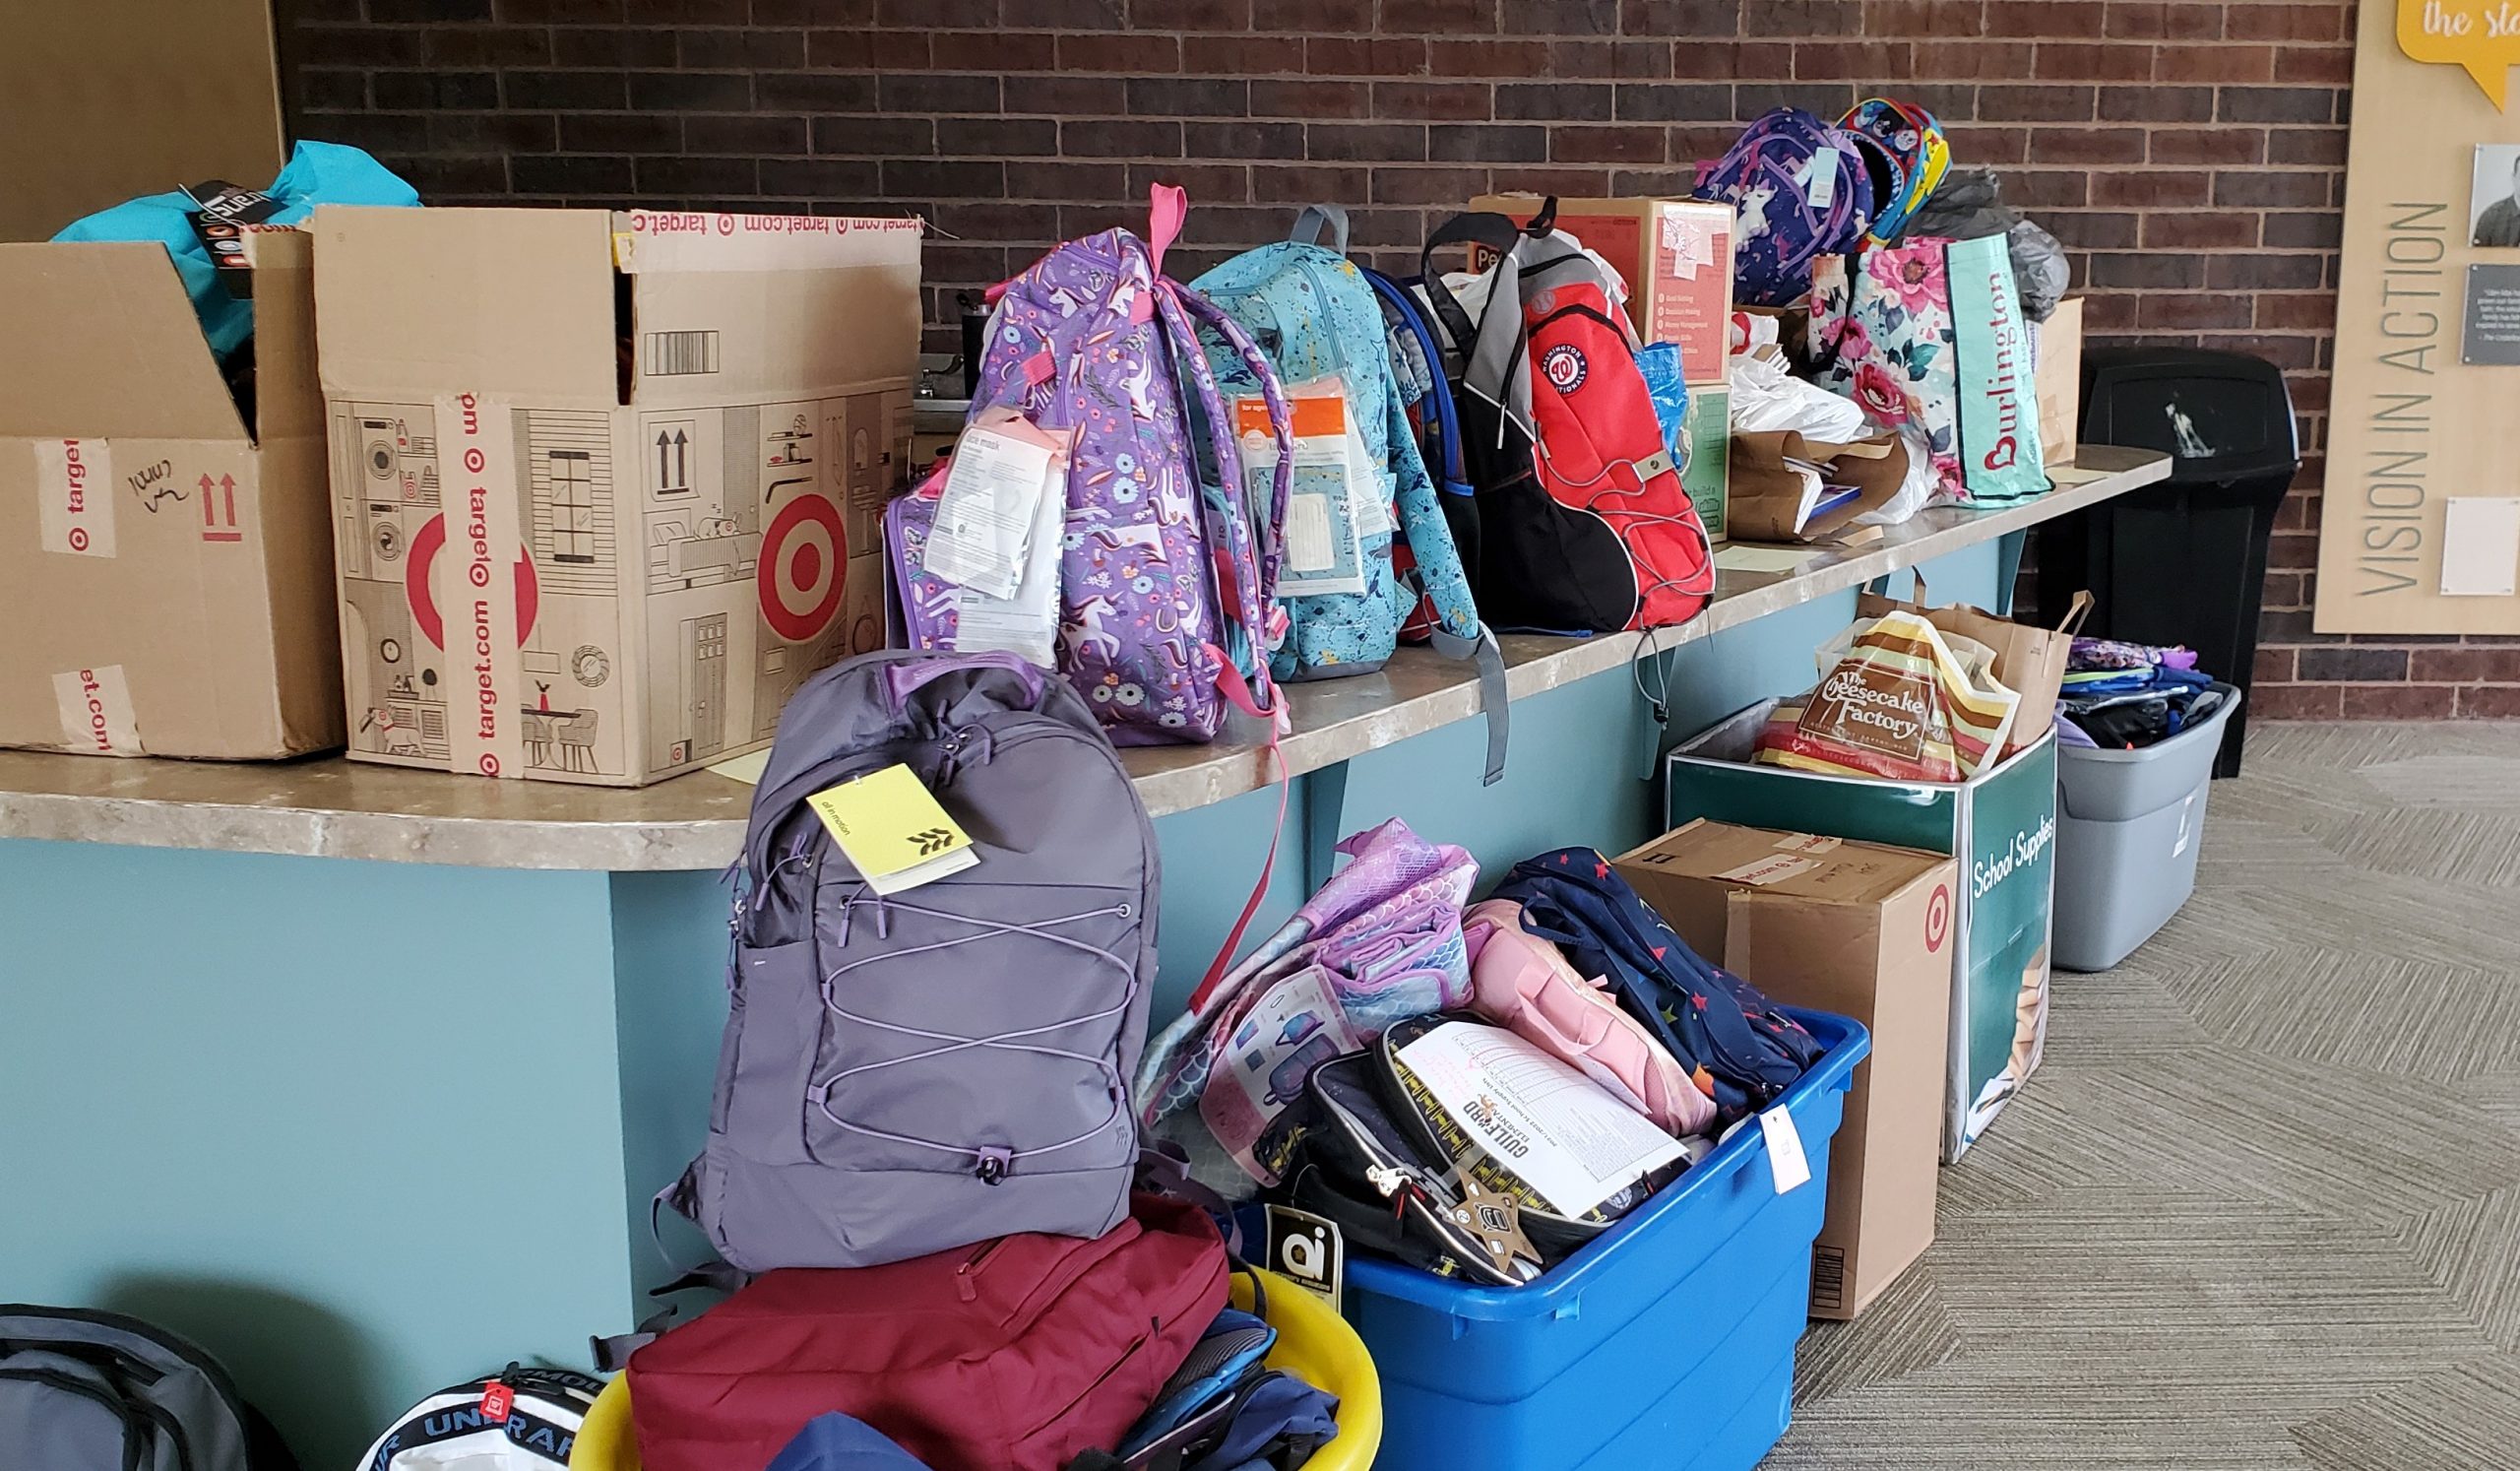 Kids reaching out to help others through a backpack collection